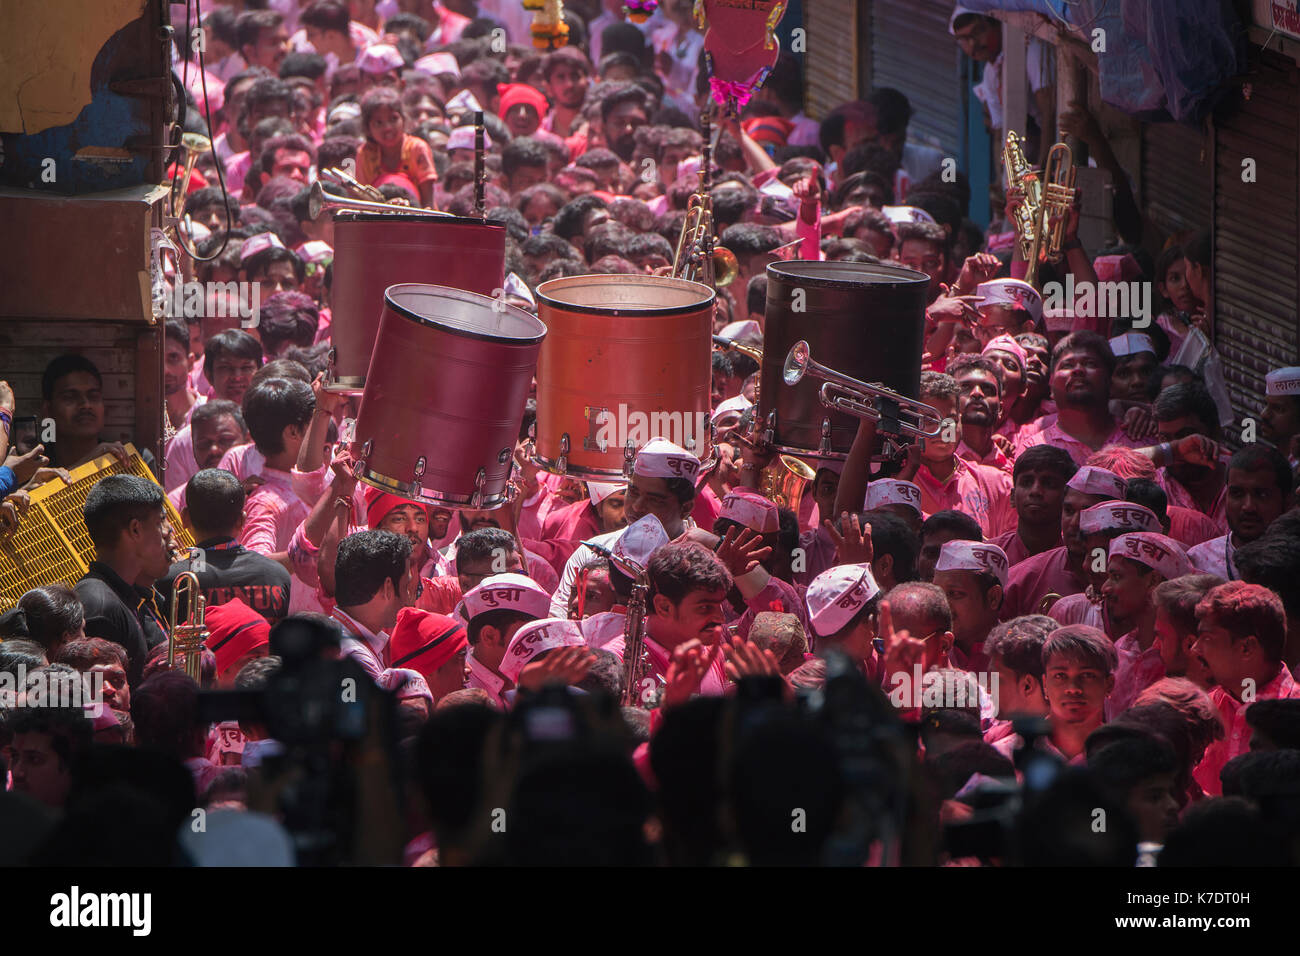 The image of Devotees dancing for Ganpati or Elephant headed lord  on the way to immersion at lalbaug, .Mumbai, India Stock Photo